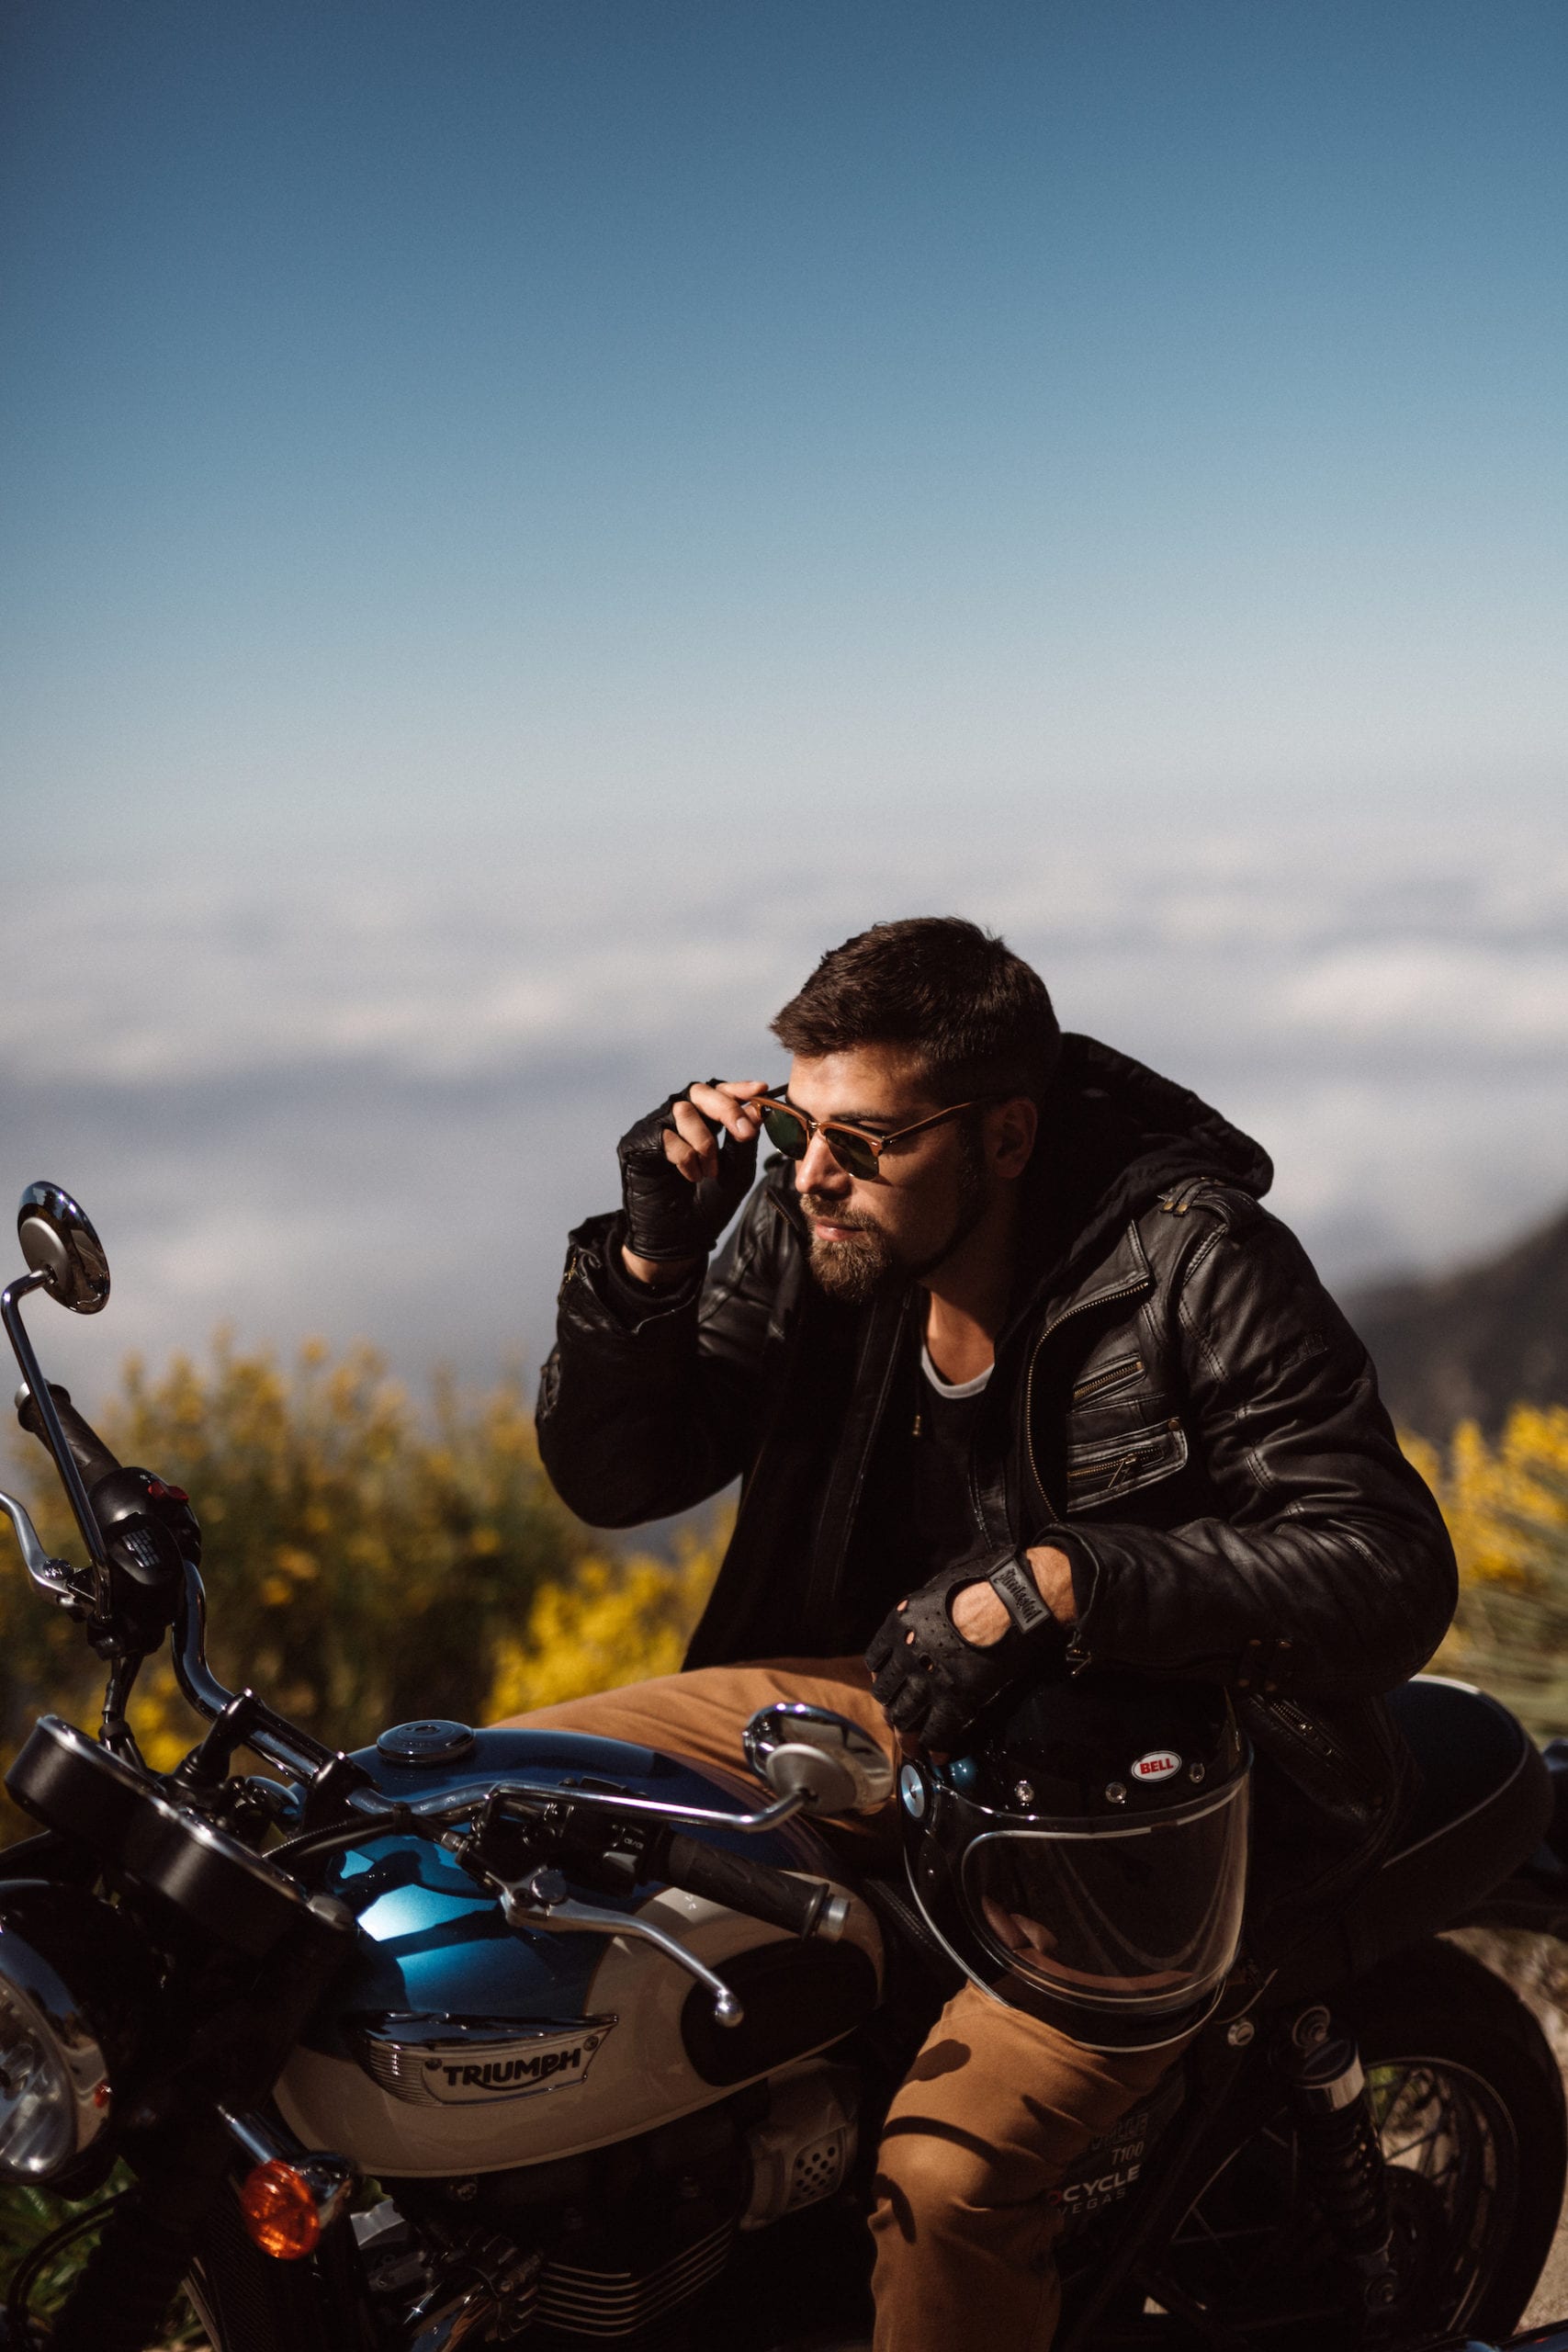 Motorcycle rider adjusts Ray-Ban Clubmaster sunglasses on his motorcycle before resuming the road trip.